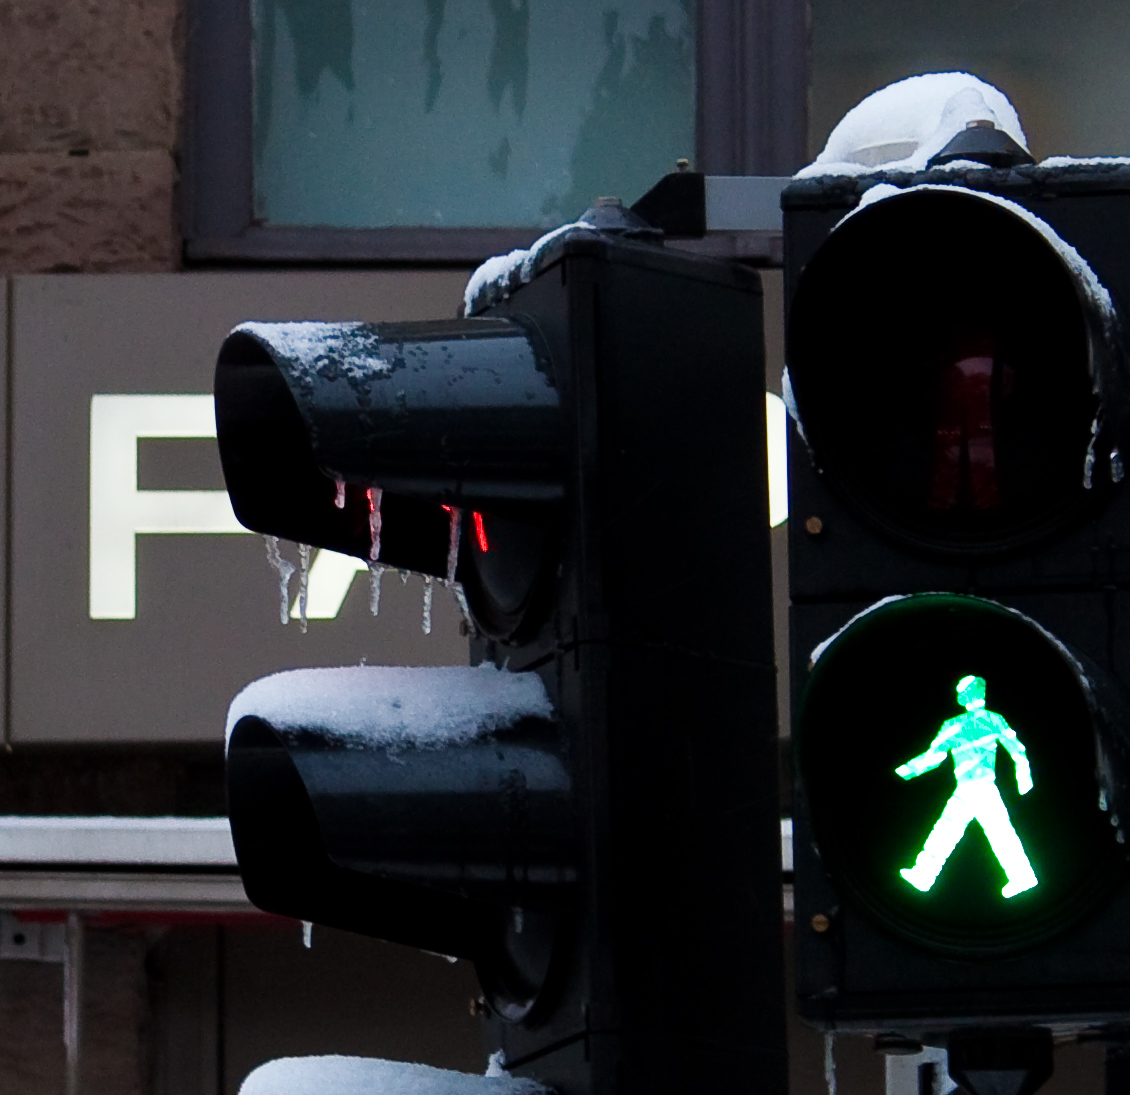 a green traffic light with a person walking on it